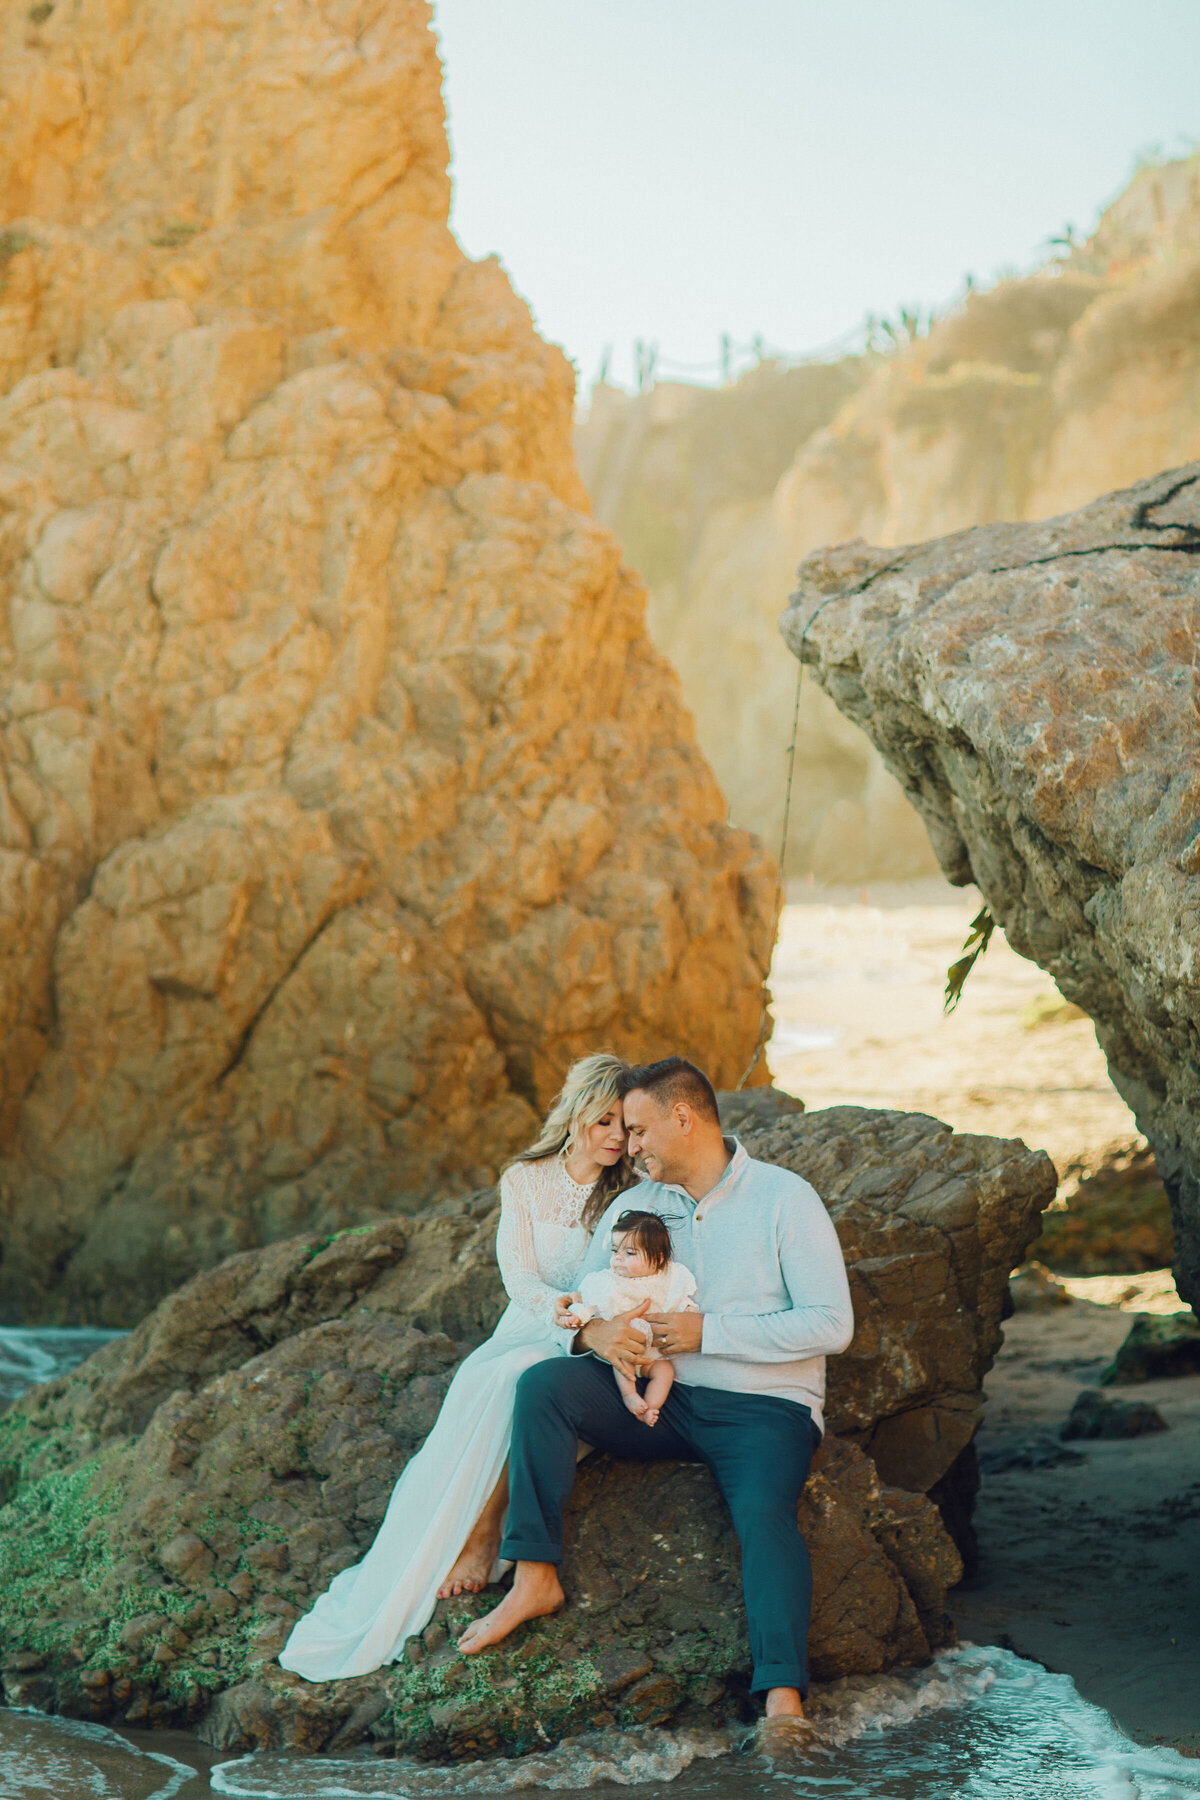 Family Portrait Photo Of Couple Holding Their Baby While Sitting On a Rock Formation Los Angeles